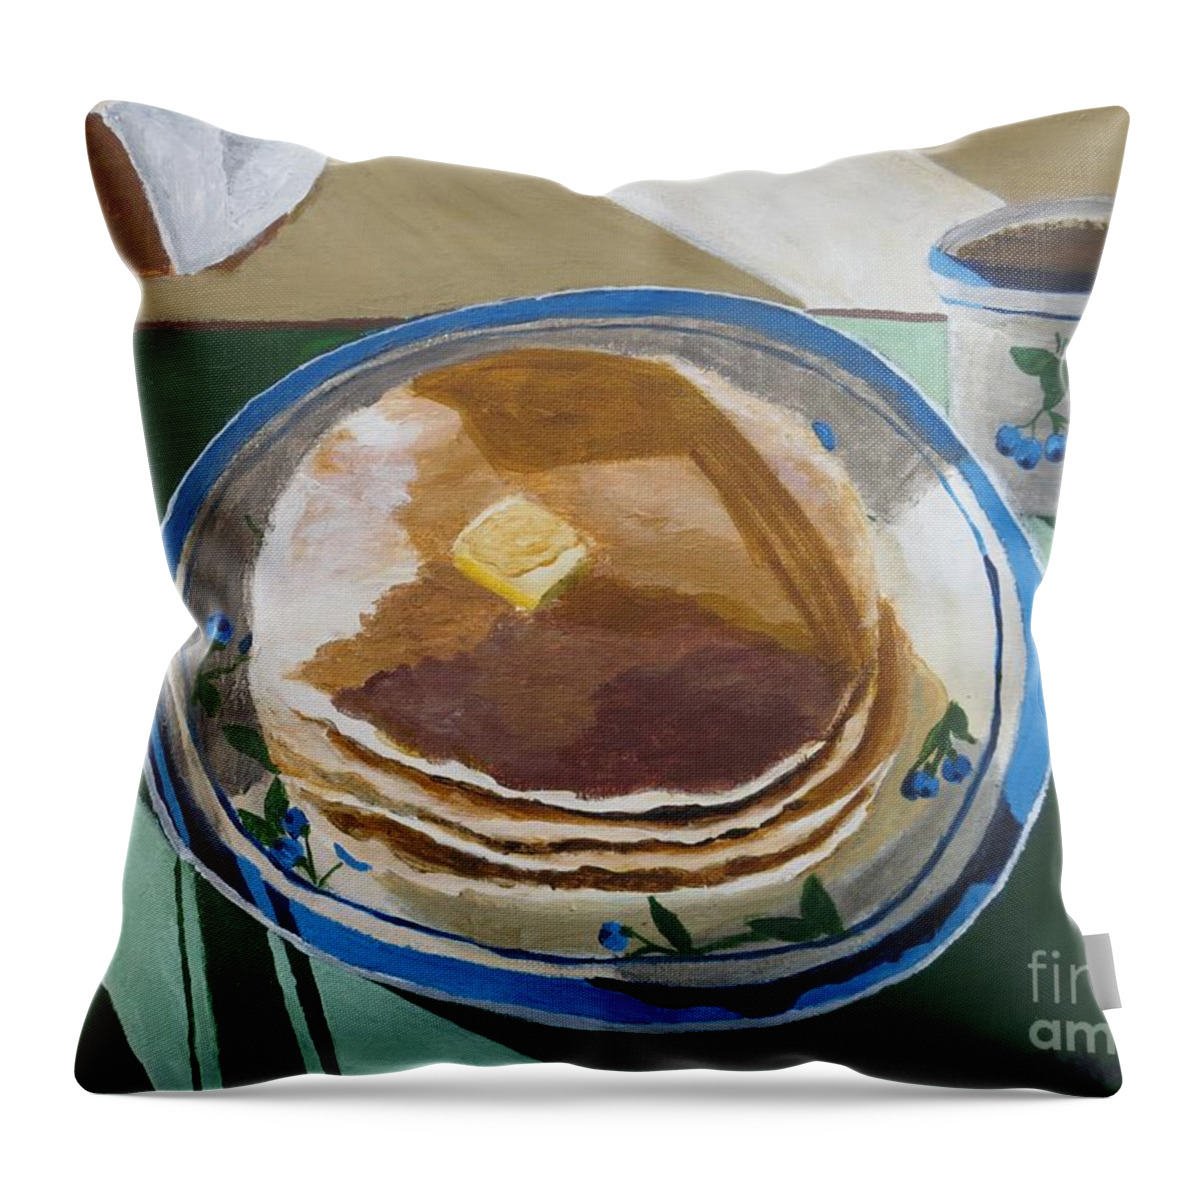 Pancakes Throw Pillow featuring the painting Breakfast Is Served by C E Dill